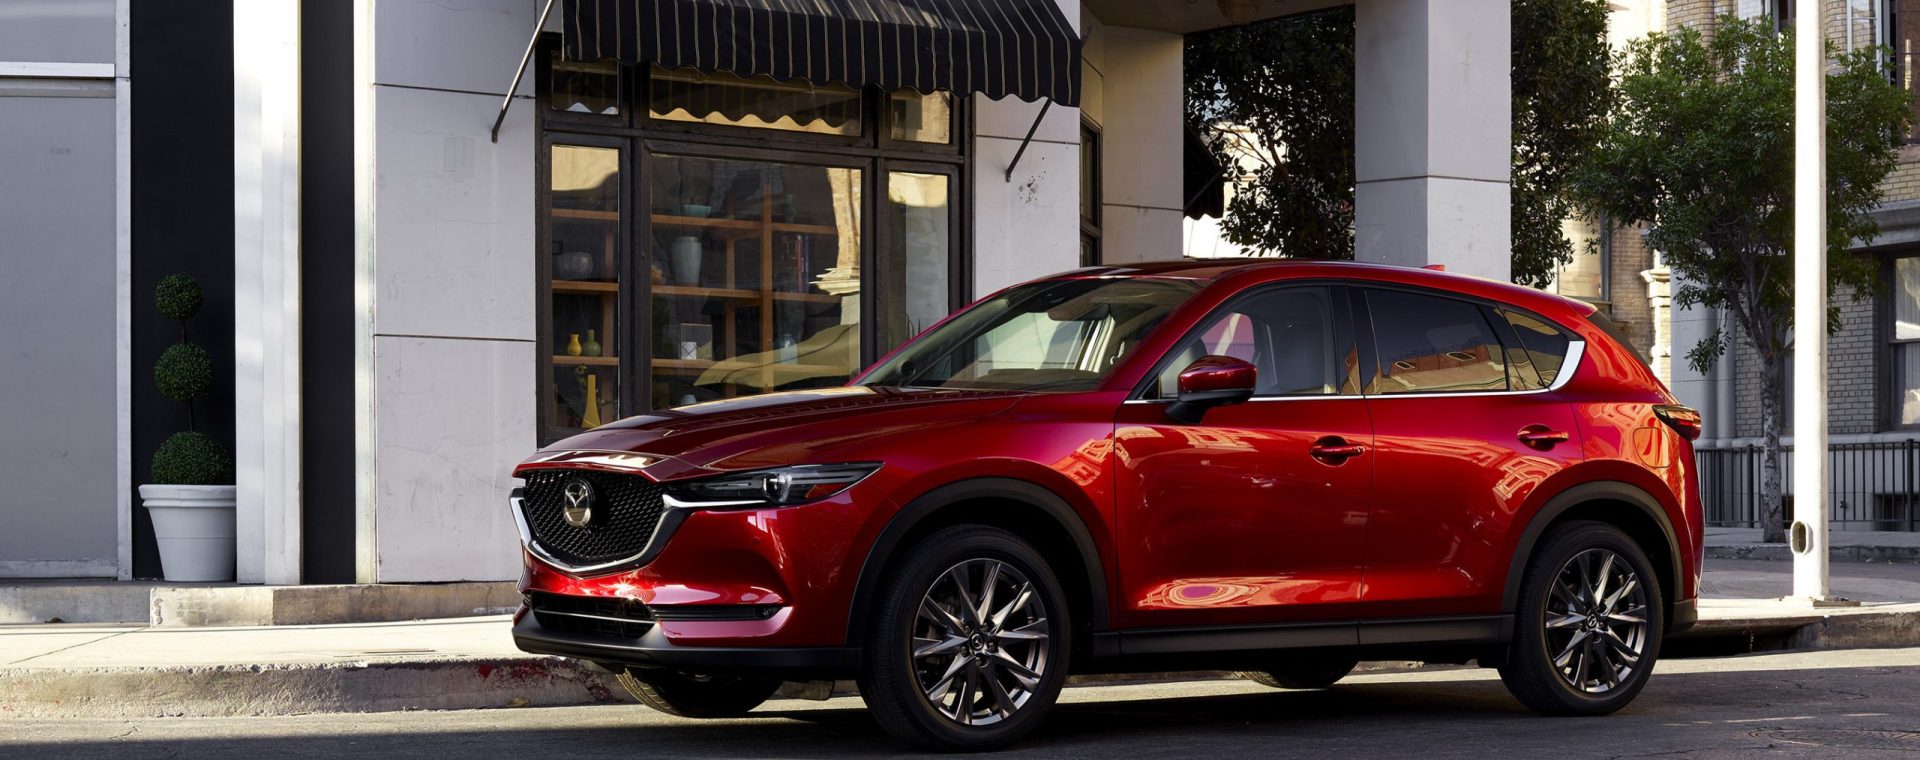 A luxurious red 2021 Mazda CX-5 parked in front of a building